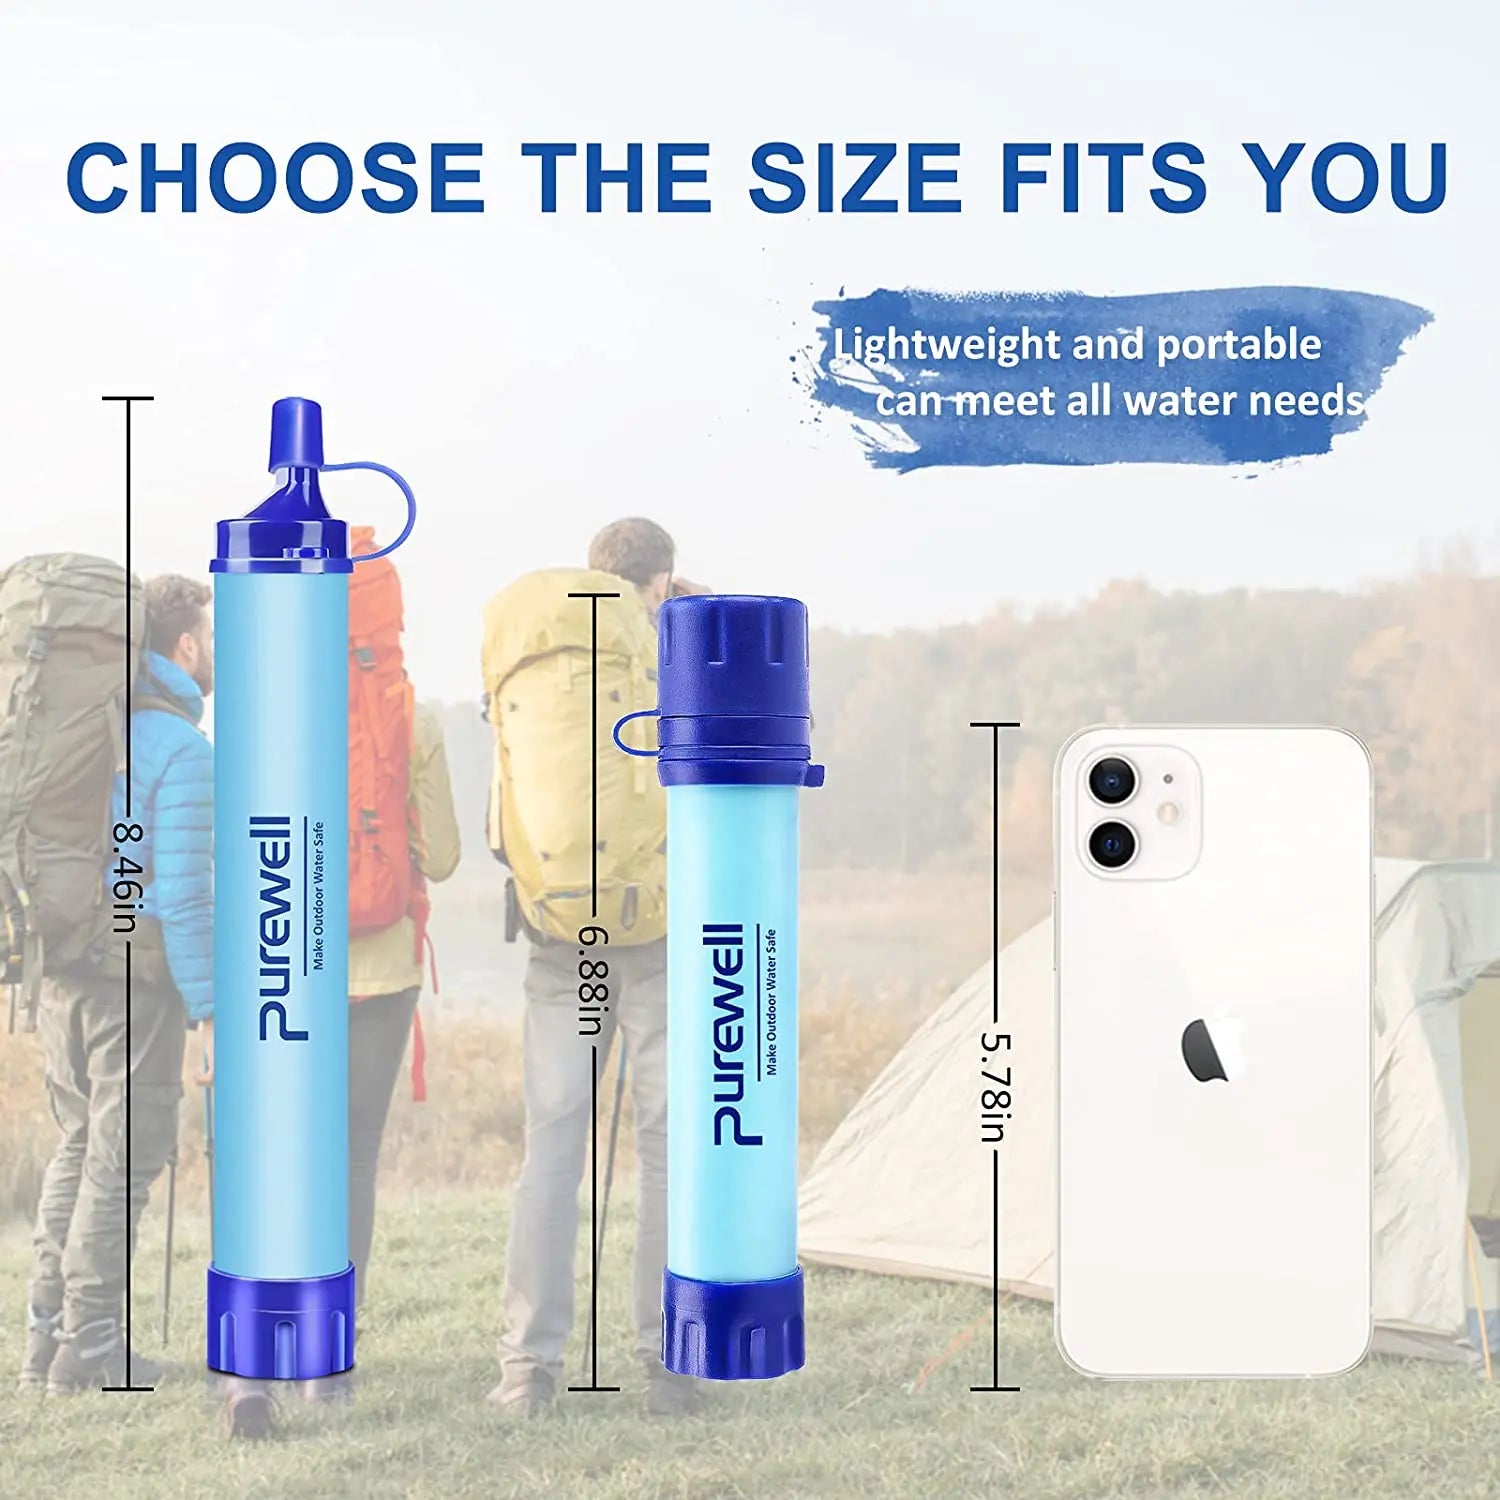 Purewell Portable Hand Pump Water Filter Review 